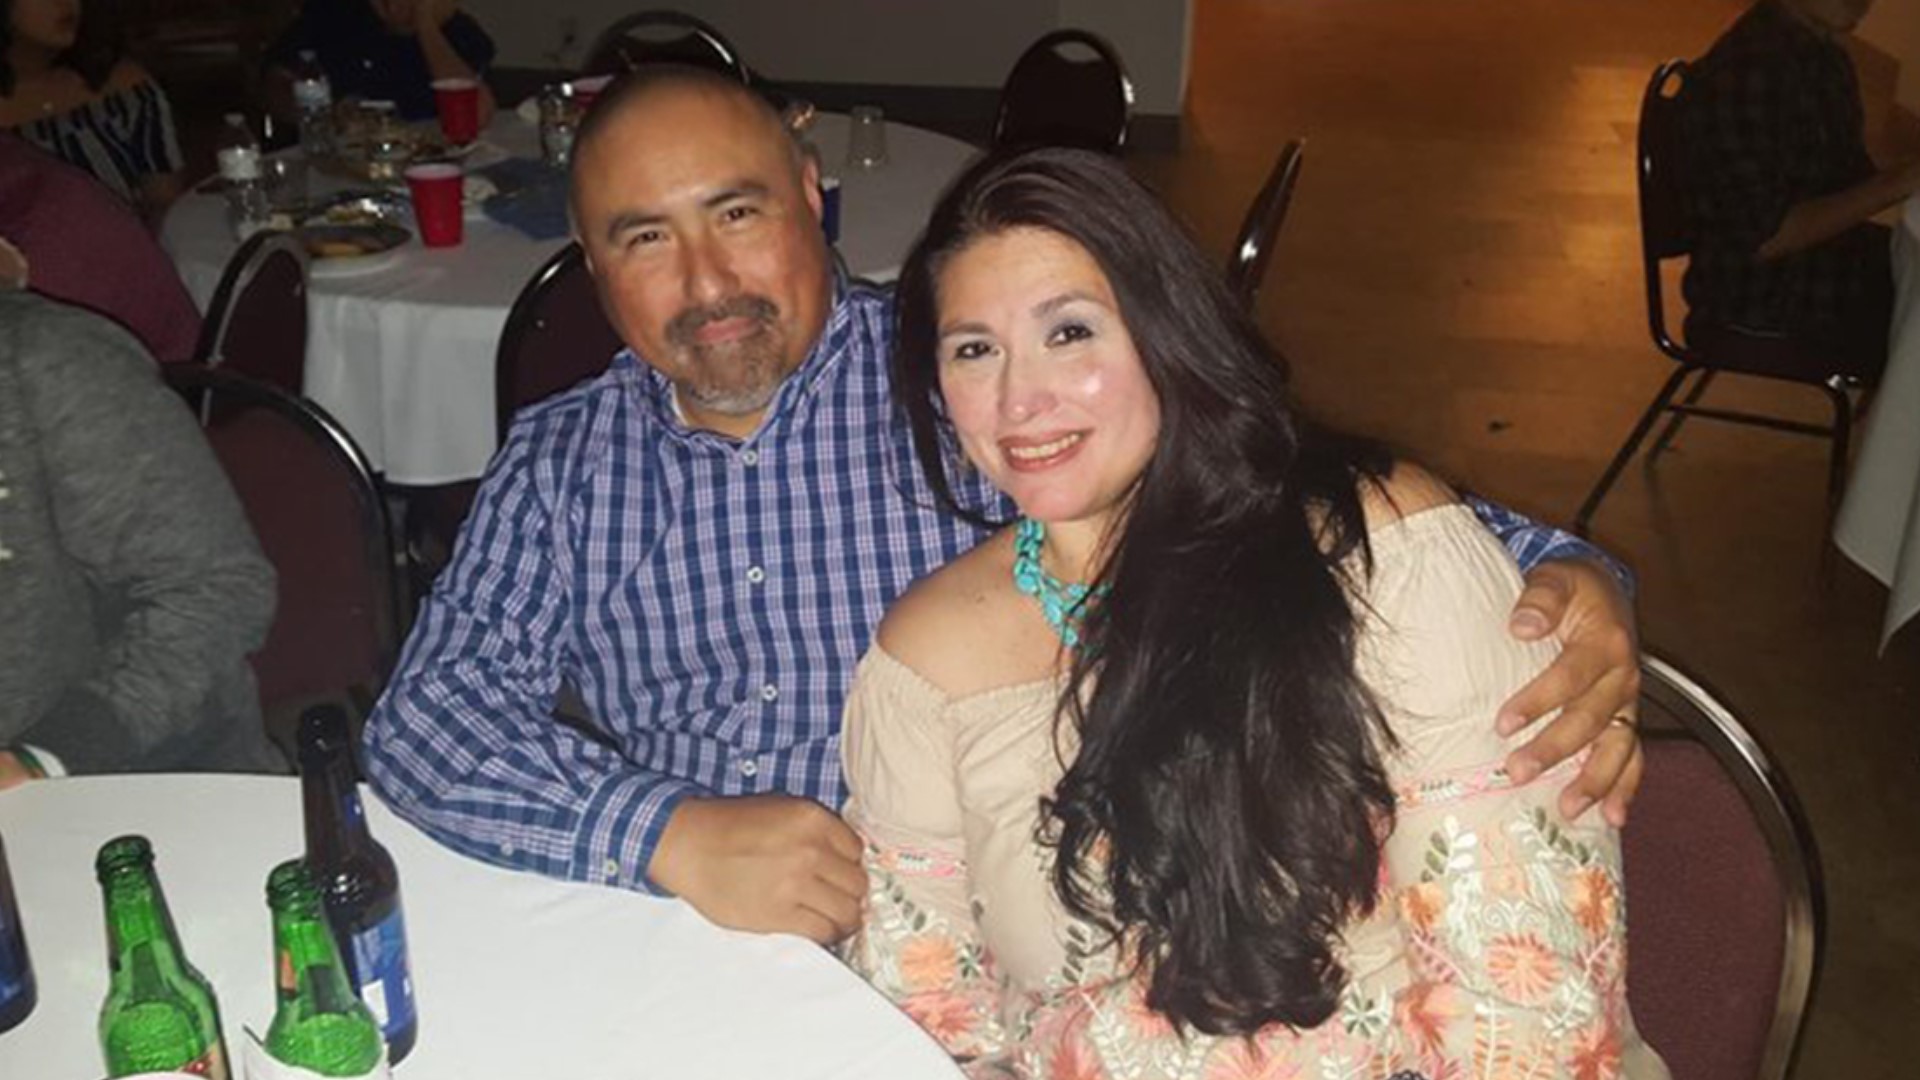 Guadalupe "Joe" Garcia, 48, was the husband of Irma Garcia, who was killed in the shooting. The couple had four children.